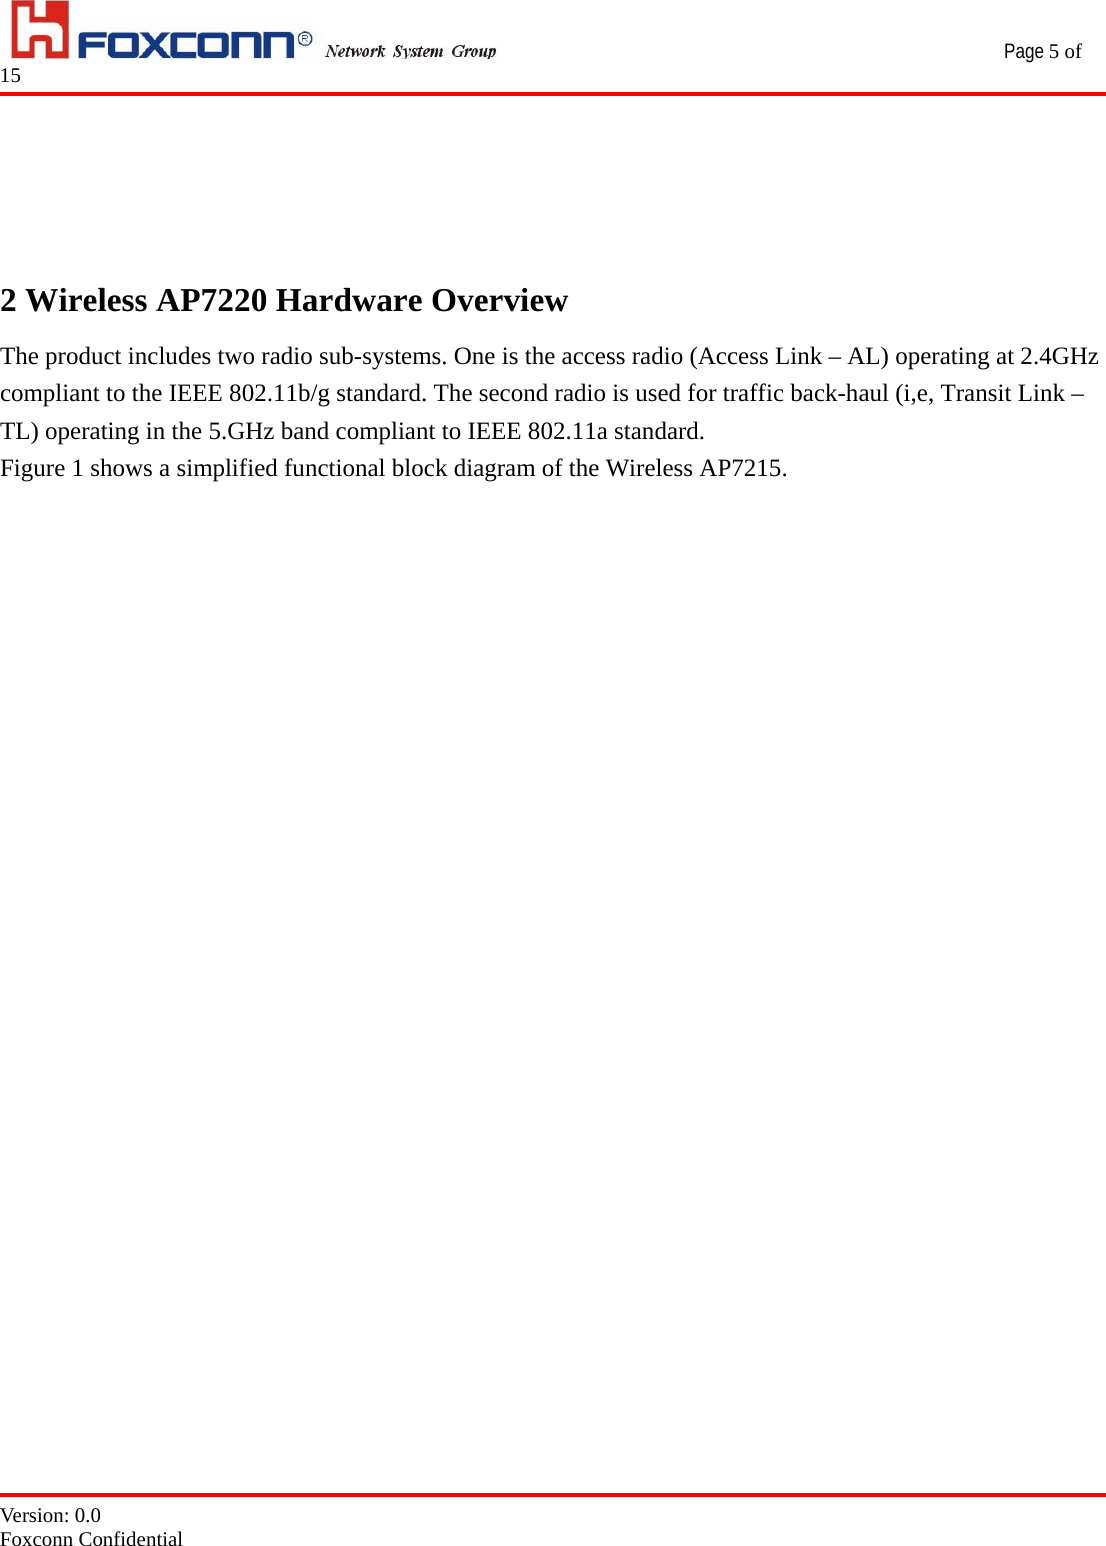                                                 Page 5 of 15   Version: 0.0 Foxconn Confidential     2 Wireless AP7220 Hardware Overview The product includes two radio sub-systems. One is the access radio (Access Link – AL) operating at 2.4GHz compliant to the IEEE 802.11b/g standard. The second radio is used for traffic back-haul (i,e, Transit Link – TL) operating in the 5.GHz band compliant to IEEE 802.11a standard. Figure 1 shows a simplified functional block diagram of the Wireless AP7215.                           